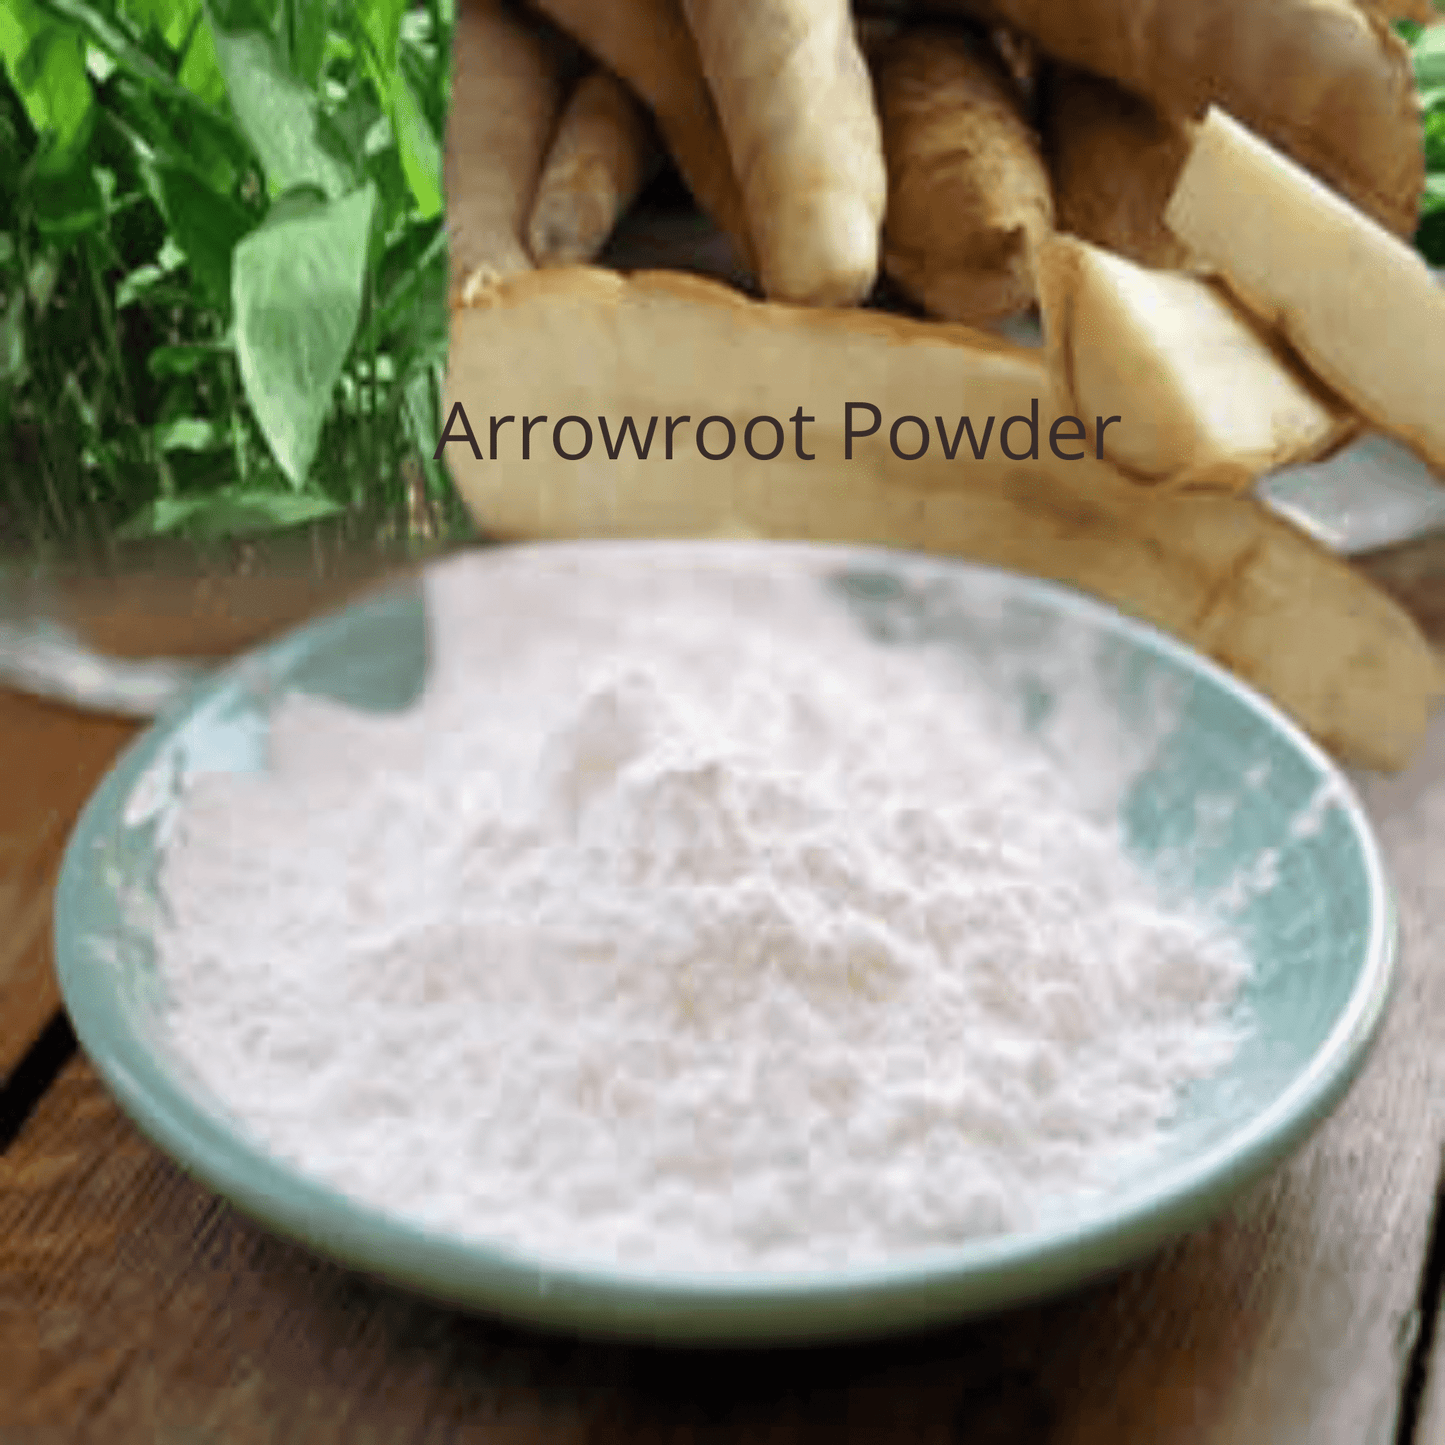 Be Green Bath and Body Powder contains arrowroot powder